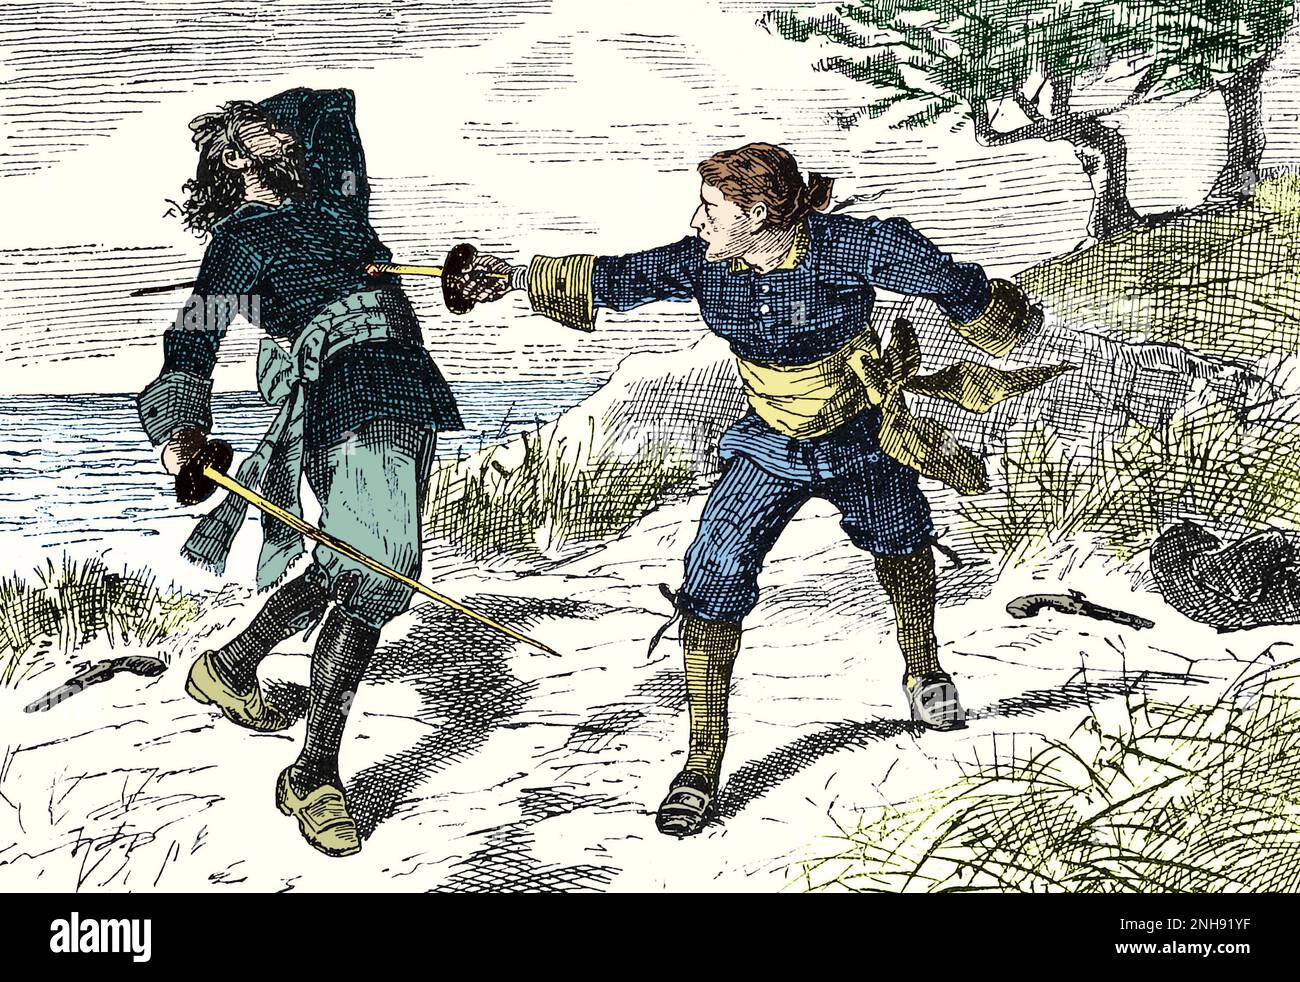 Irish pirate Anne Bonny (1697-1721) disguised as a man, killing another sailor in a duel. Illustration John Abbott, 1874. Colorized. Stock Photo